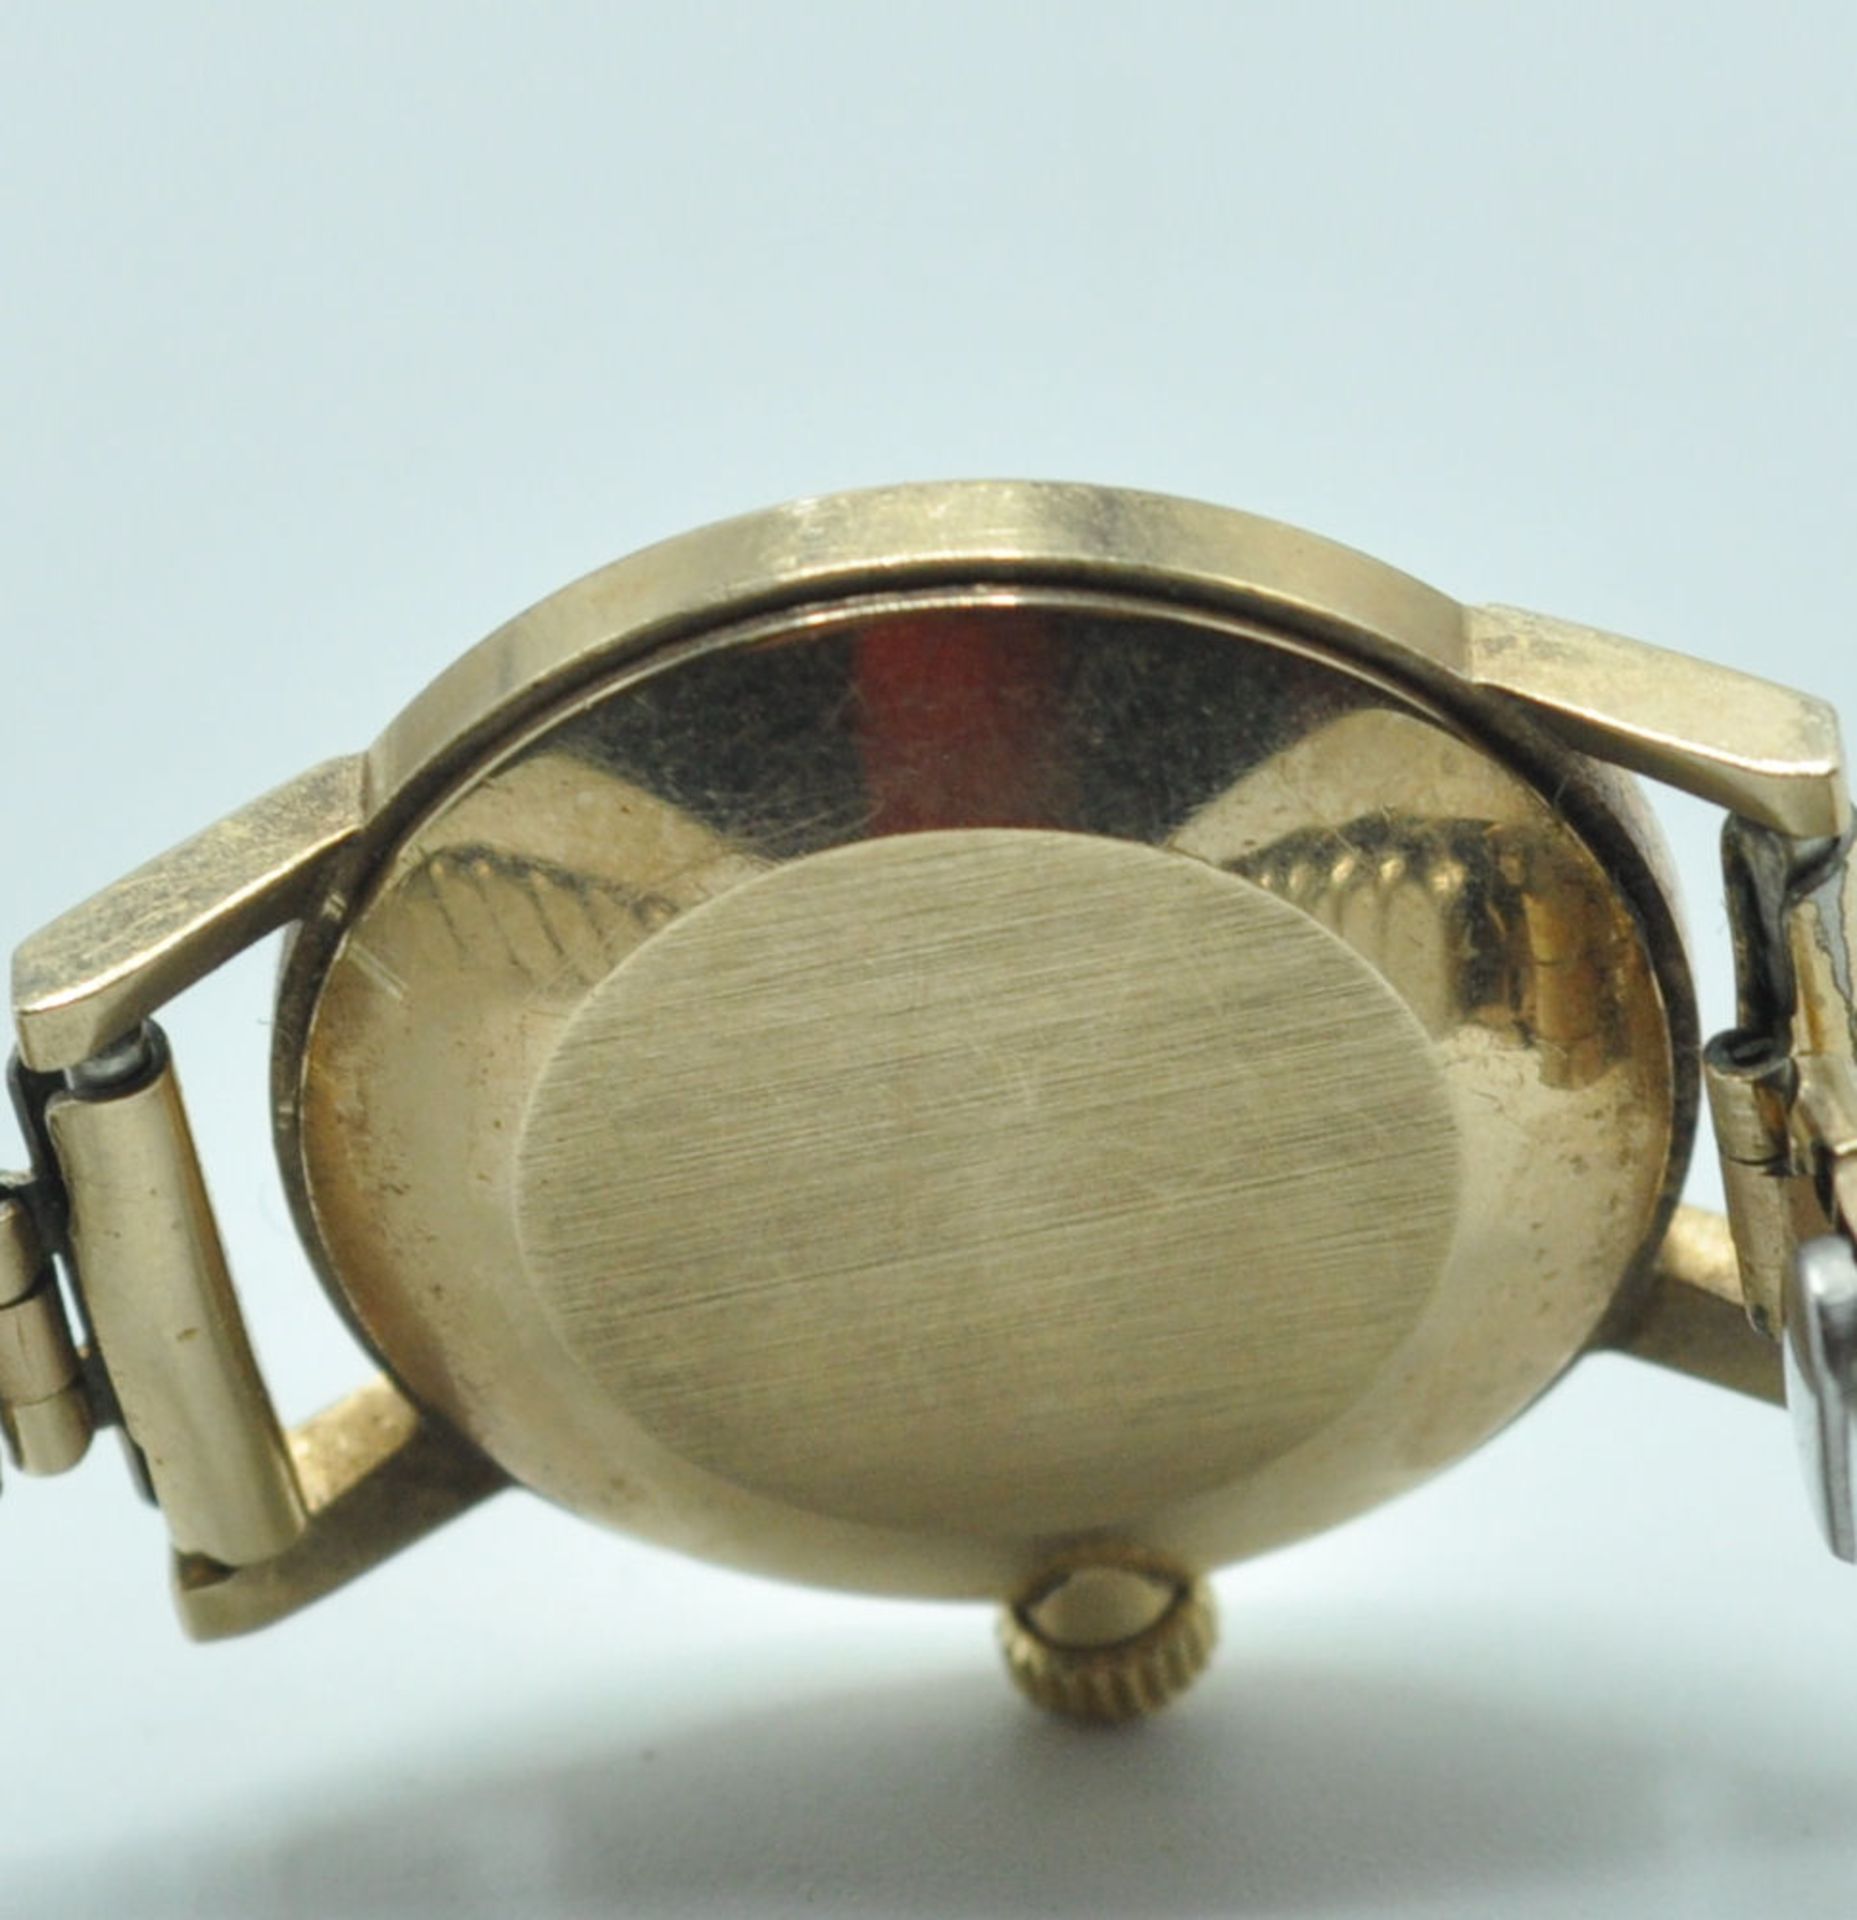 20TH CENTURY 17 JEWELS ZENITH LADIS WATCH IN A 9CT GOLD CASE. - Image 3 of 4